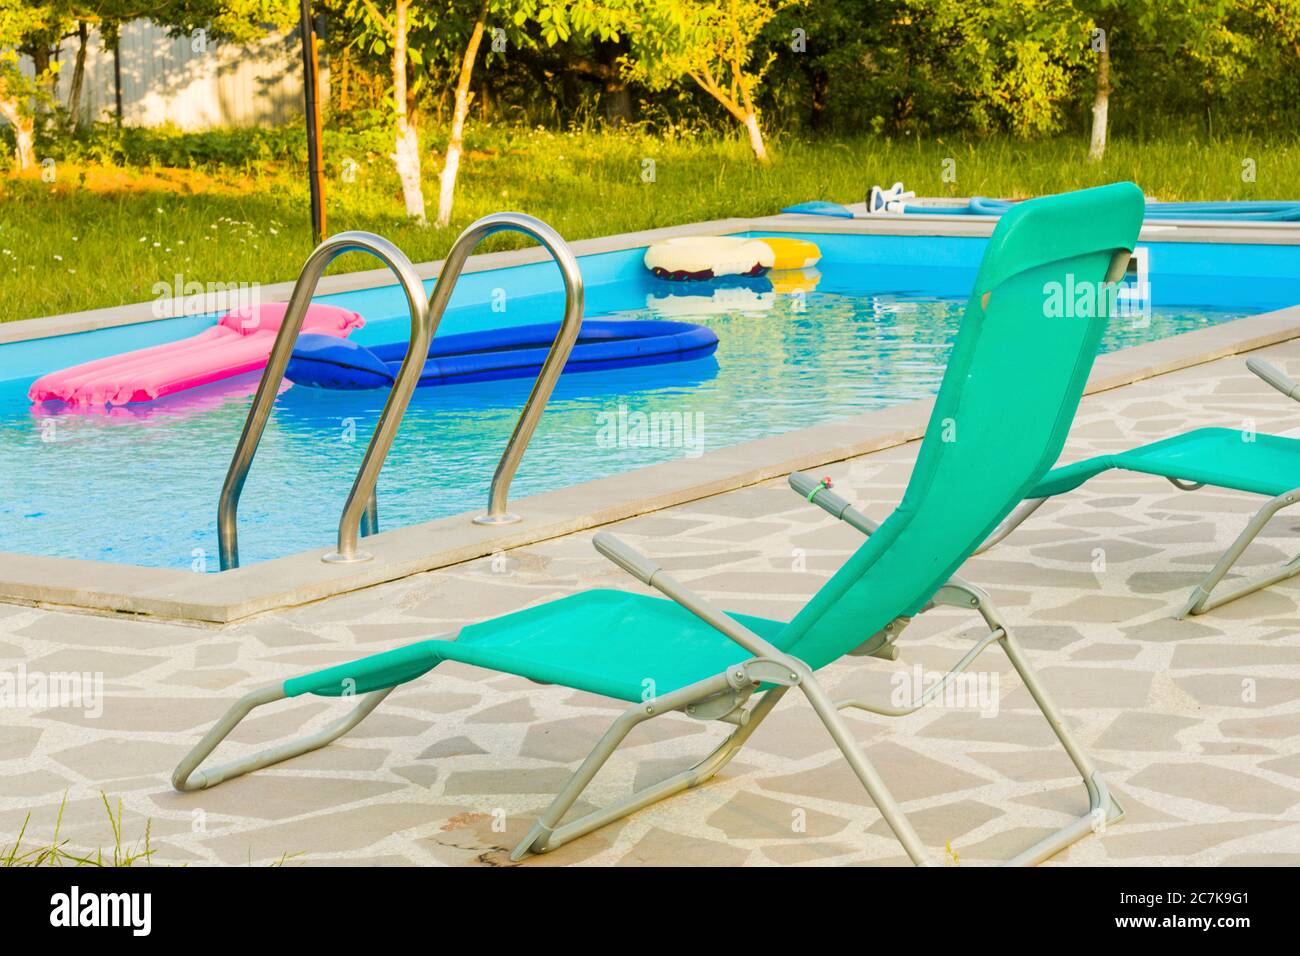 Swimming pool, summertime and empty pool, vacation and holiday, water background. Colorful summer background. Stock Photo